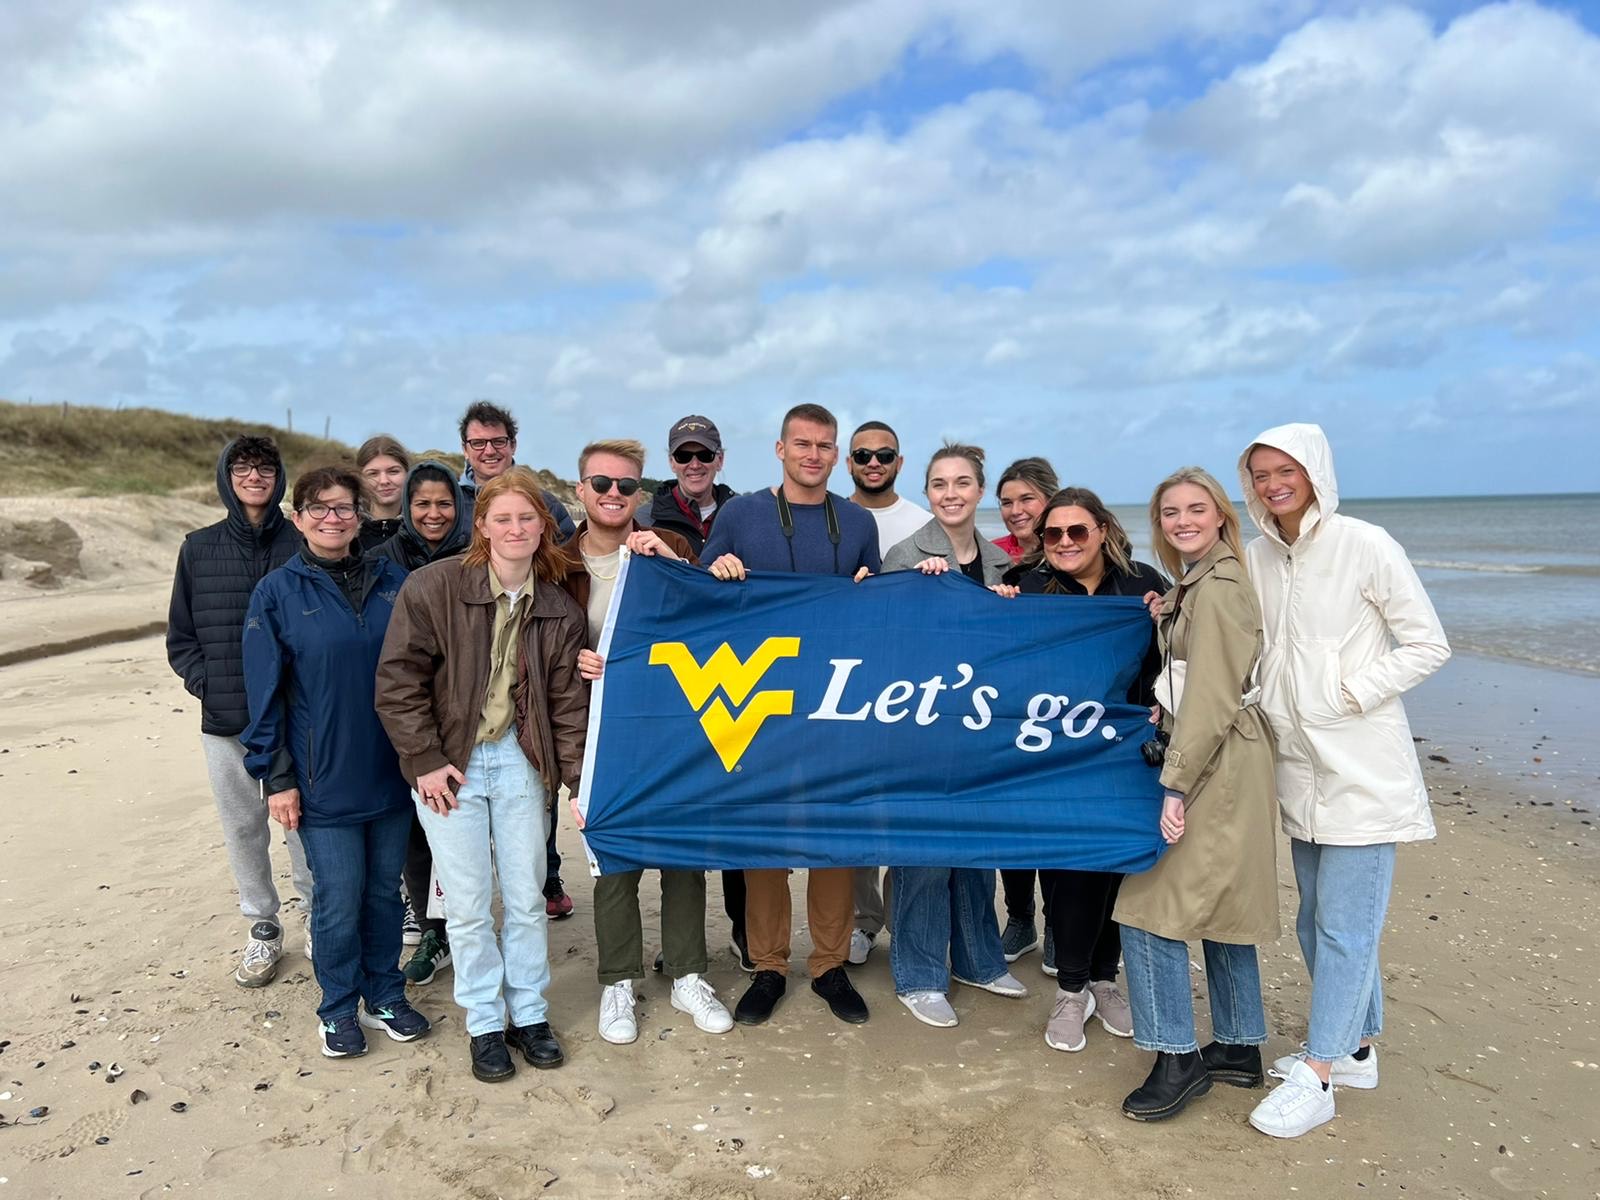 Students pose with WVU flag in Normandy, France